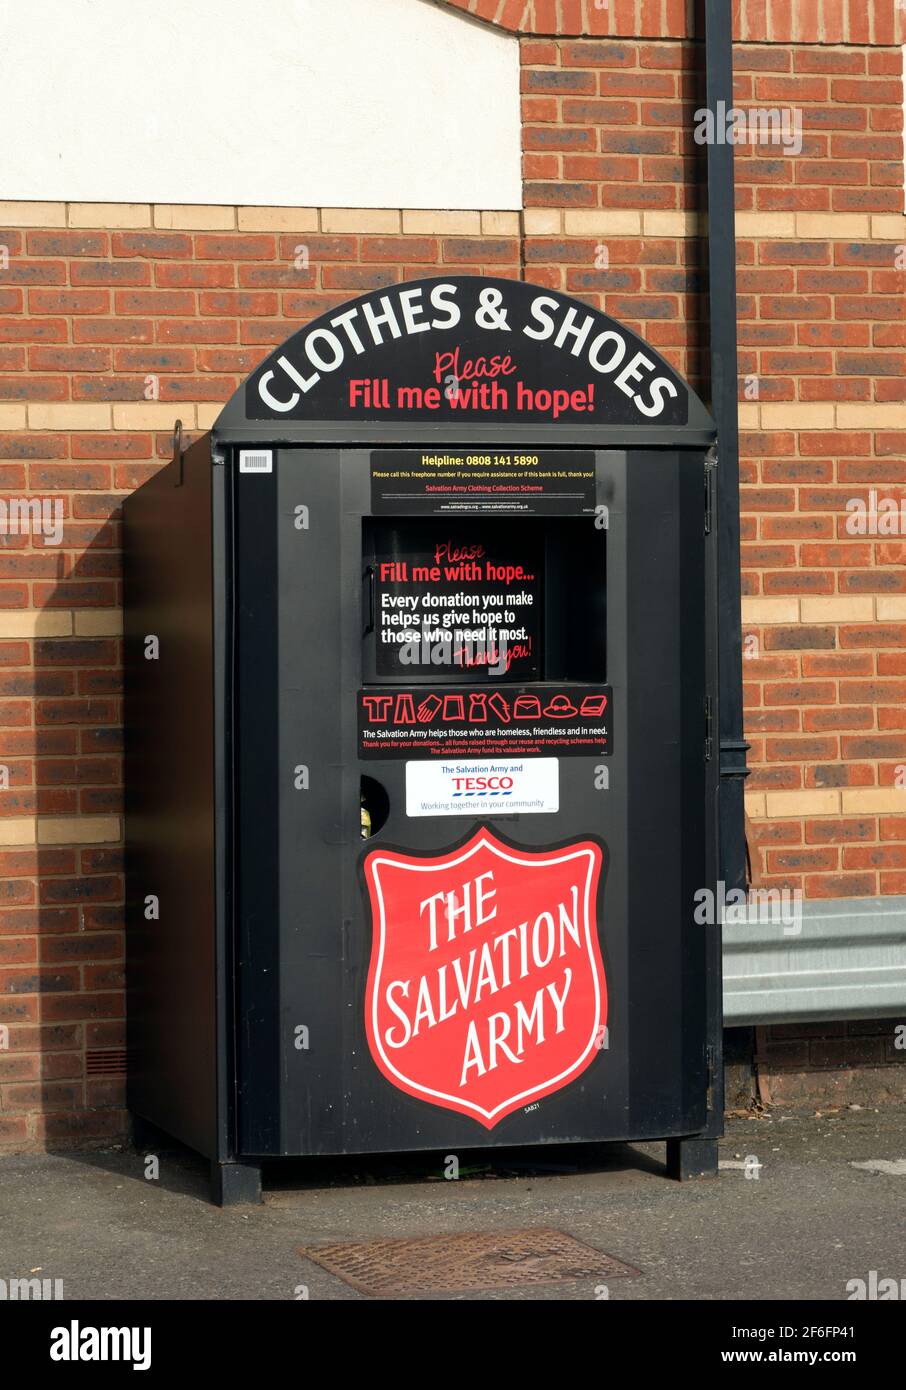 The Salvation Army clothes and shoes collecting bin, Warwick, UK Stock Photo